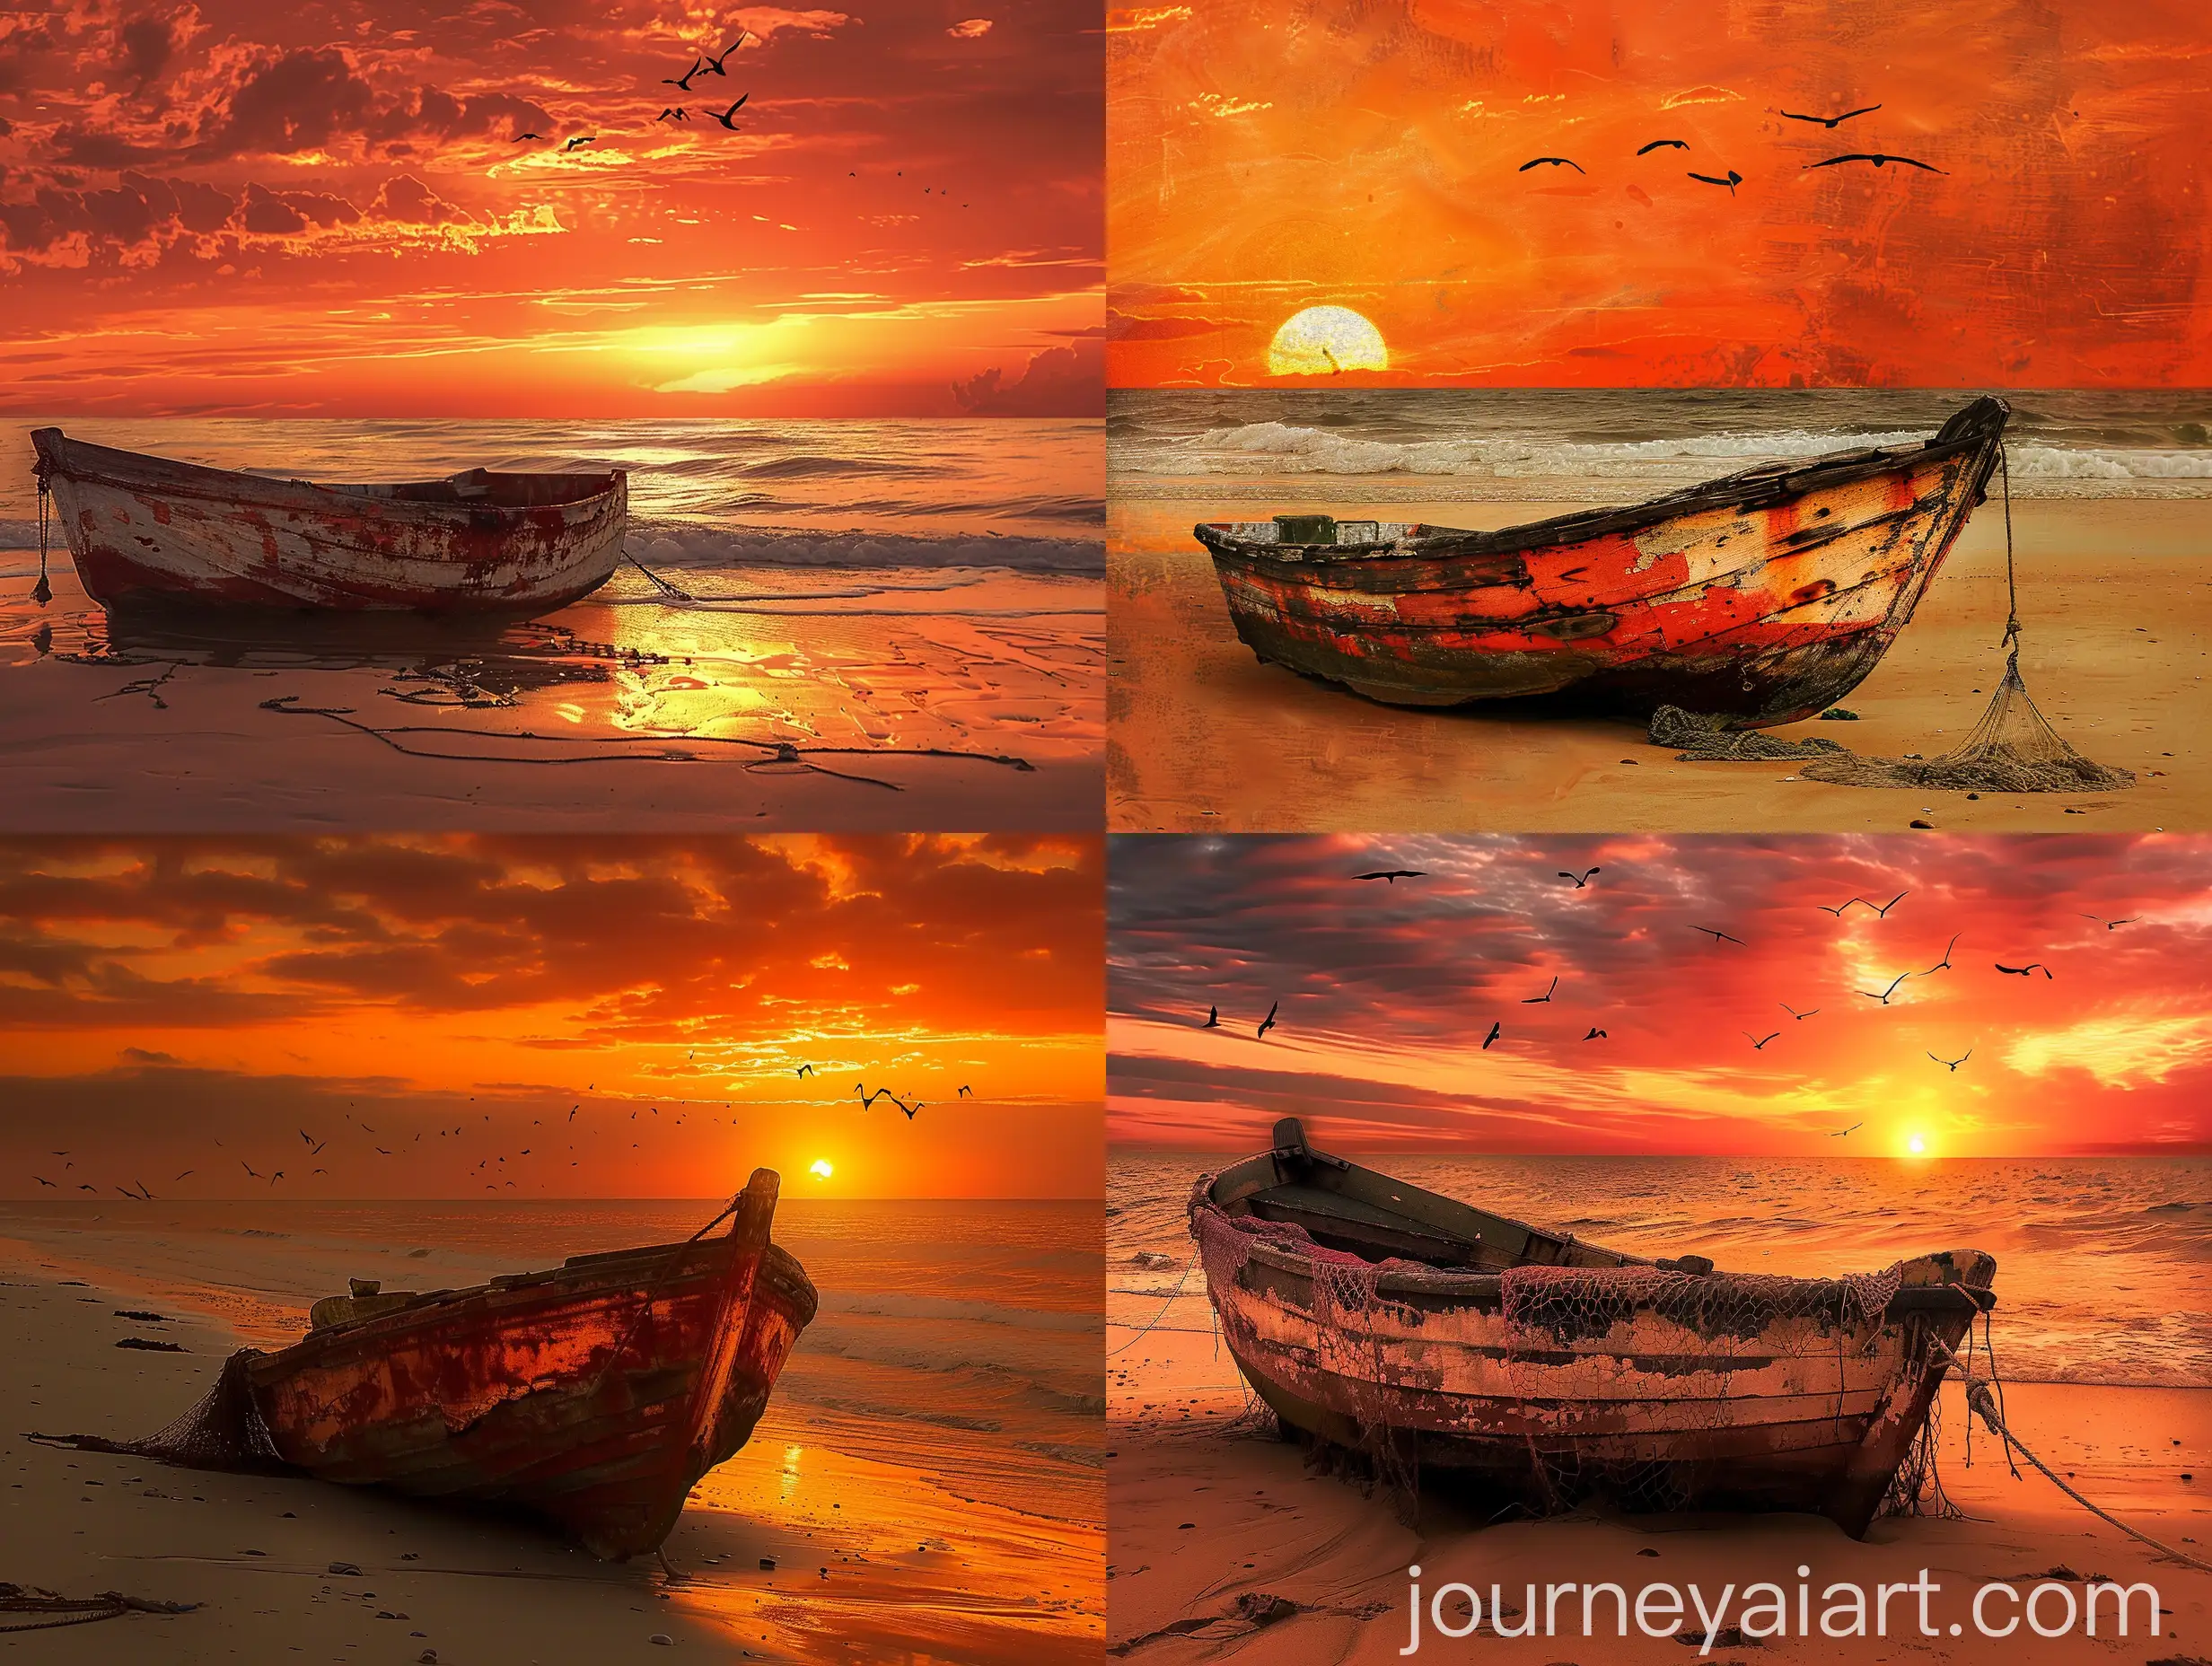 Solitary-Old-Fishing-Boat-on-Sunset-Beach